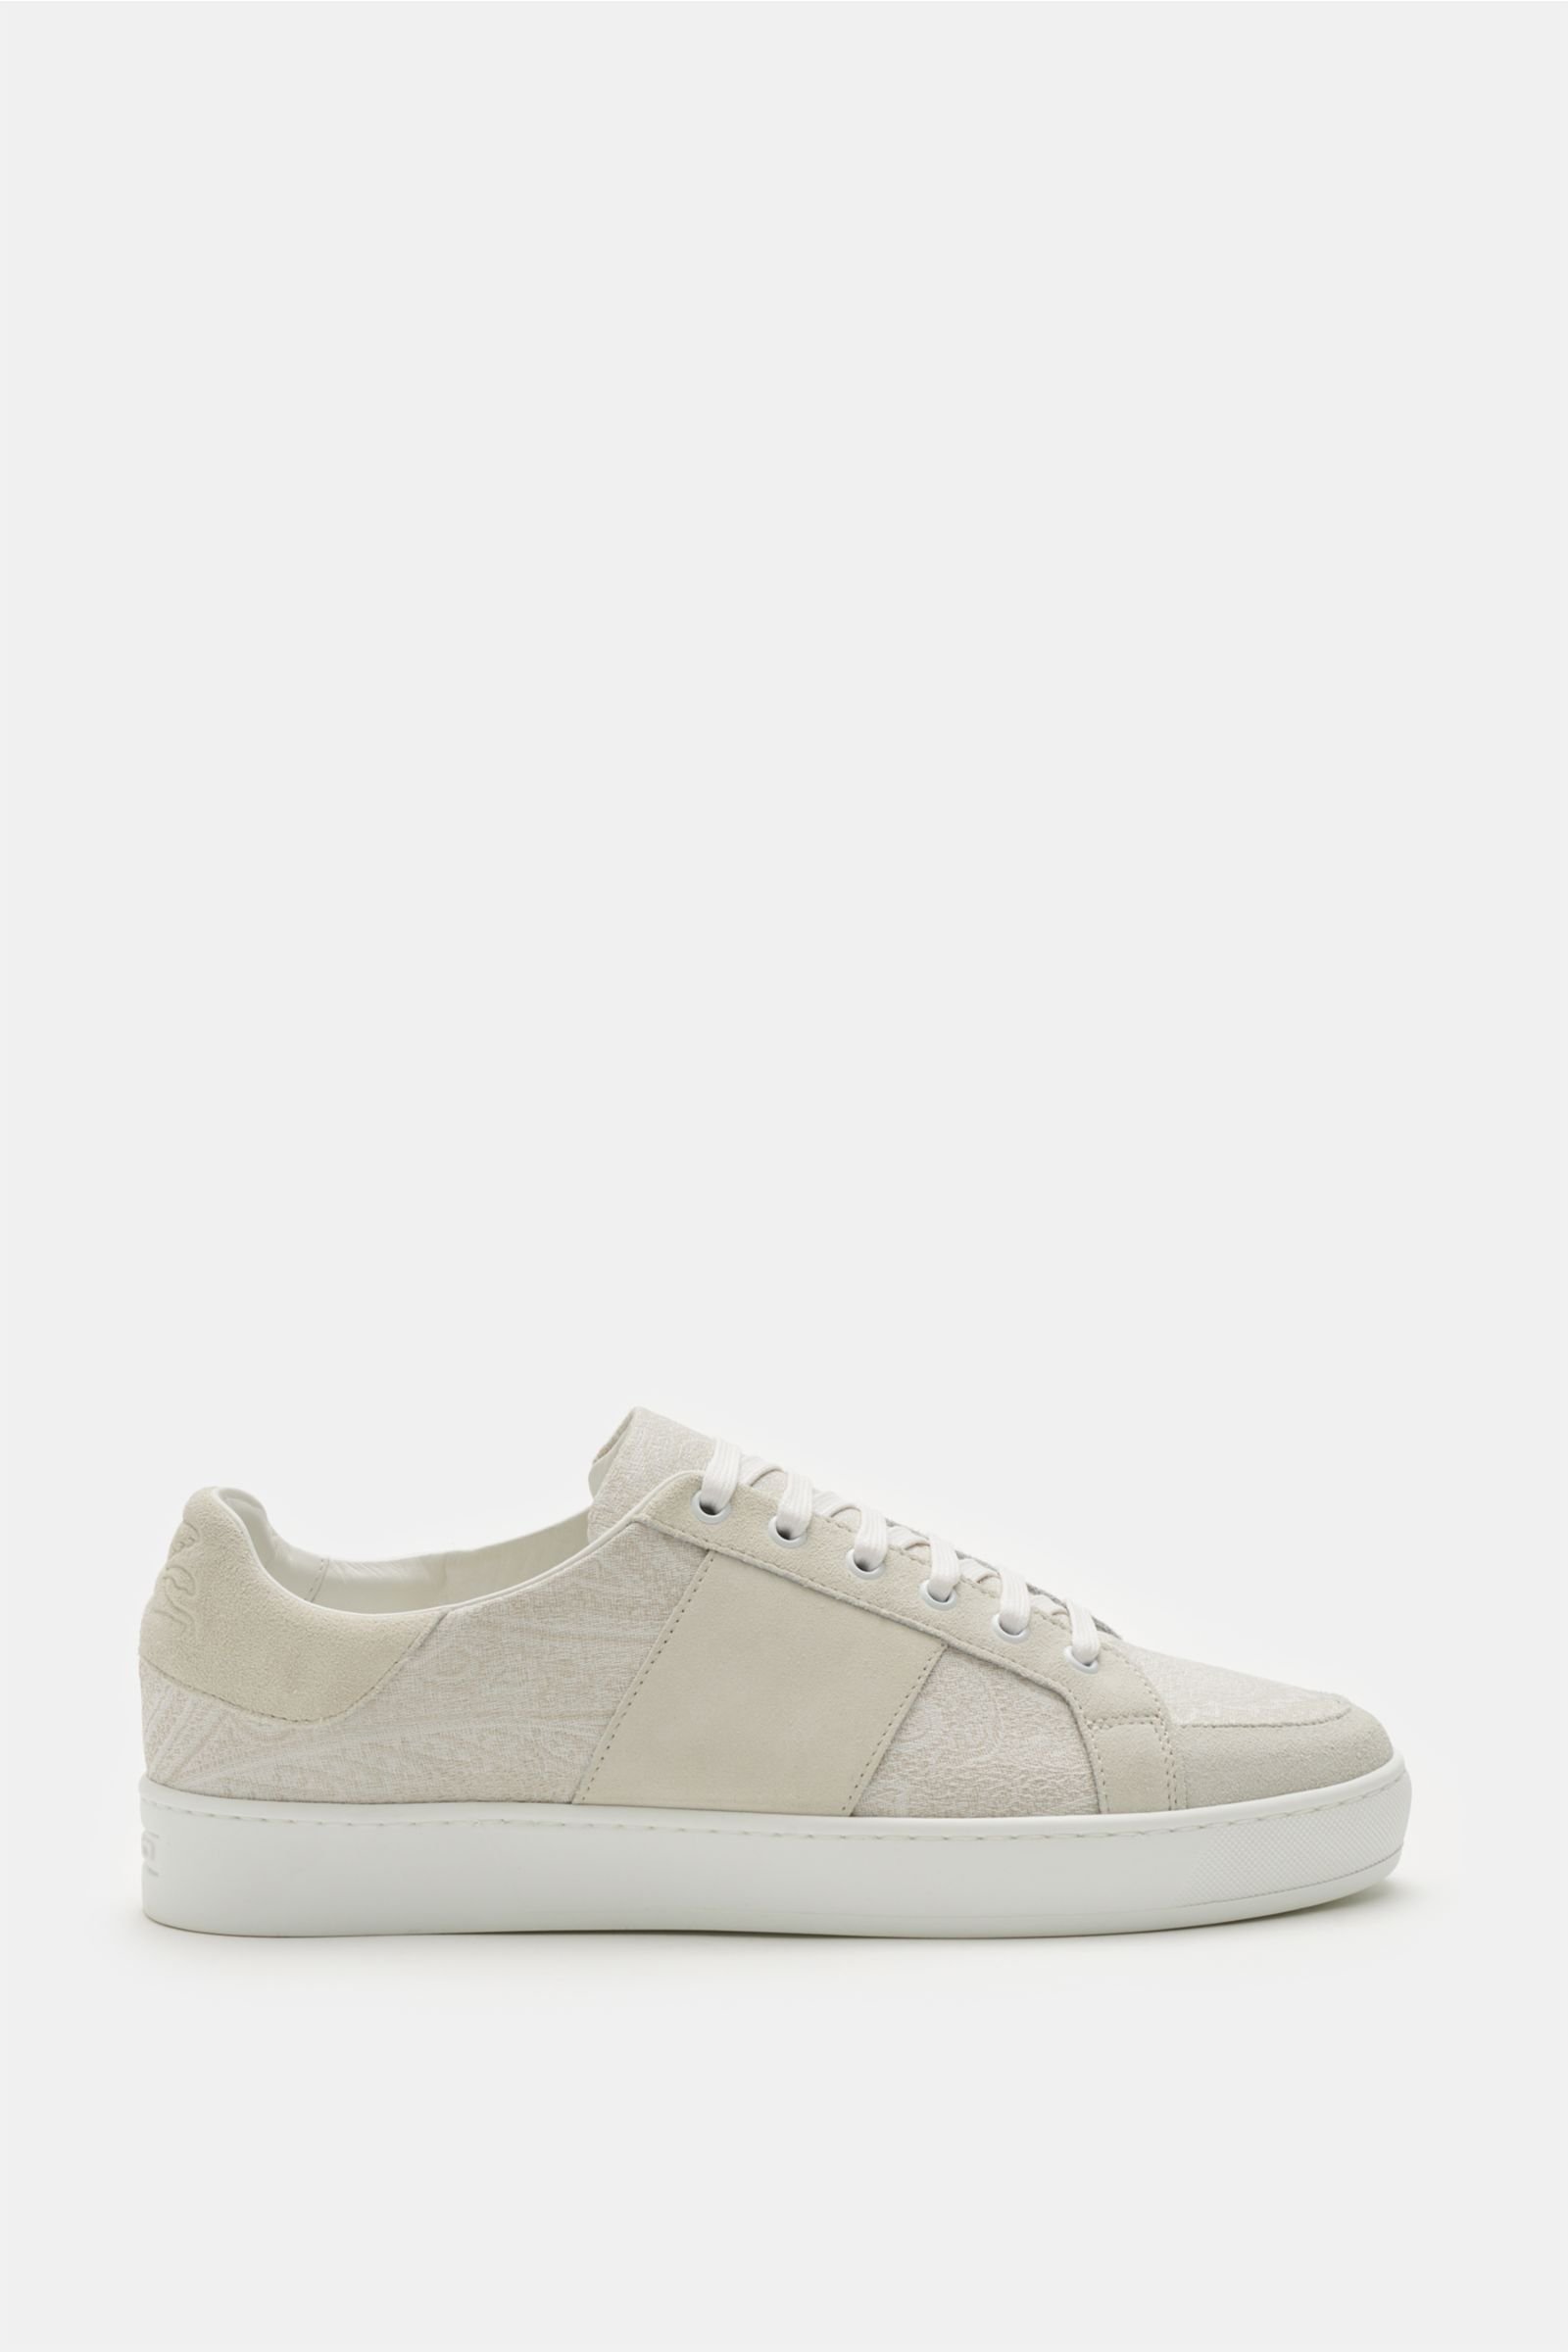 Sneakers cream/off-white patterned